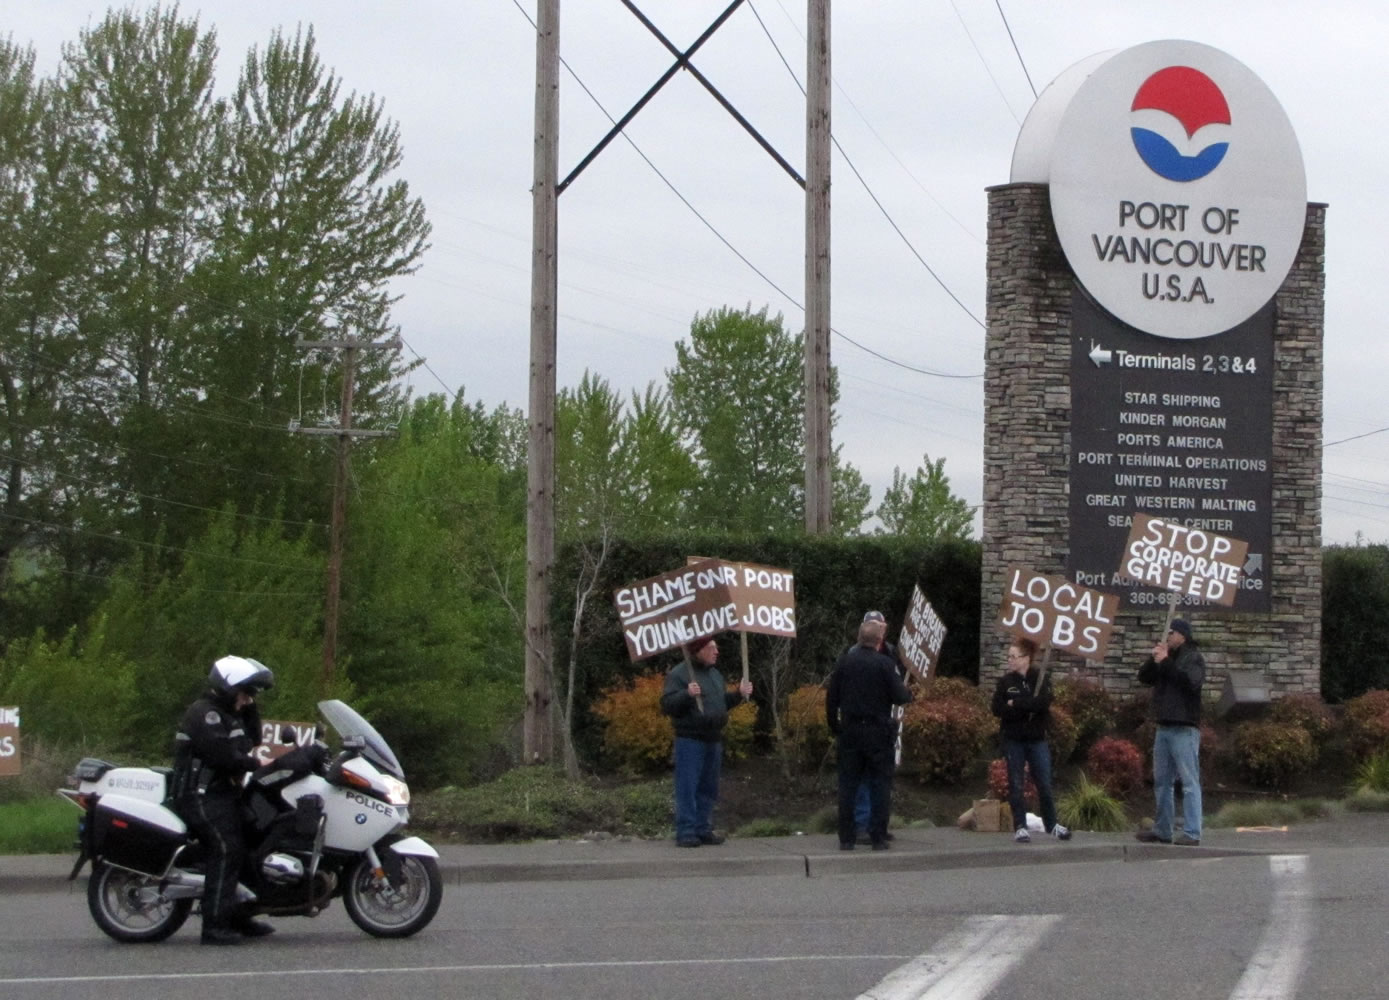 A group of demonstrators held signs outside the main entrance to the Port of Vancouver on Thursday morning.